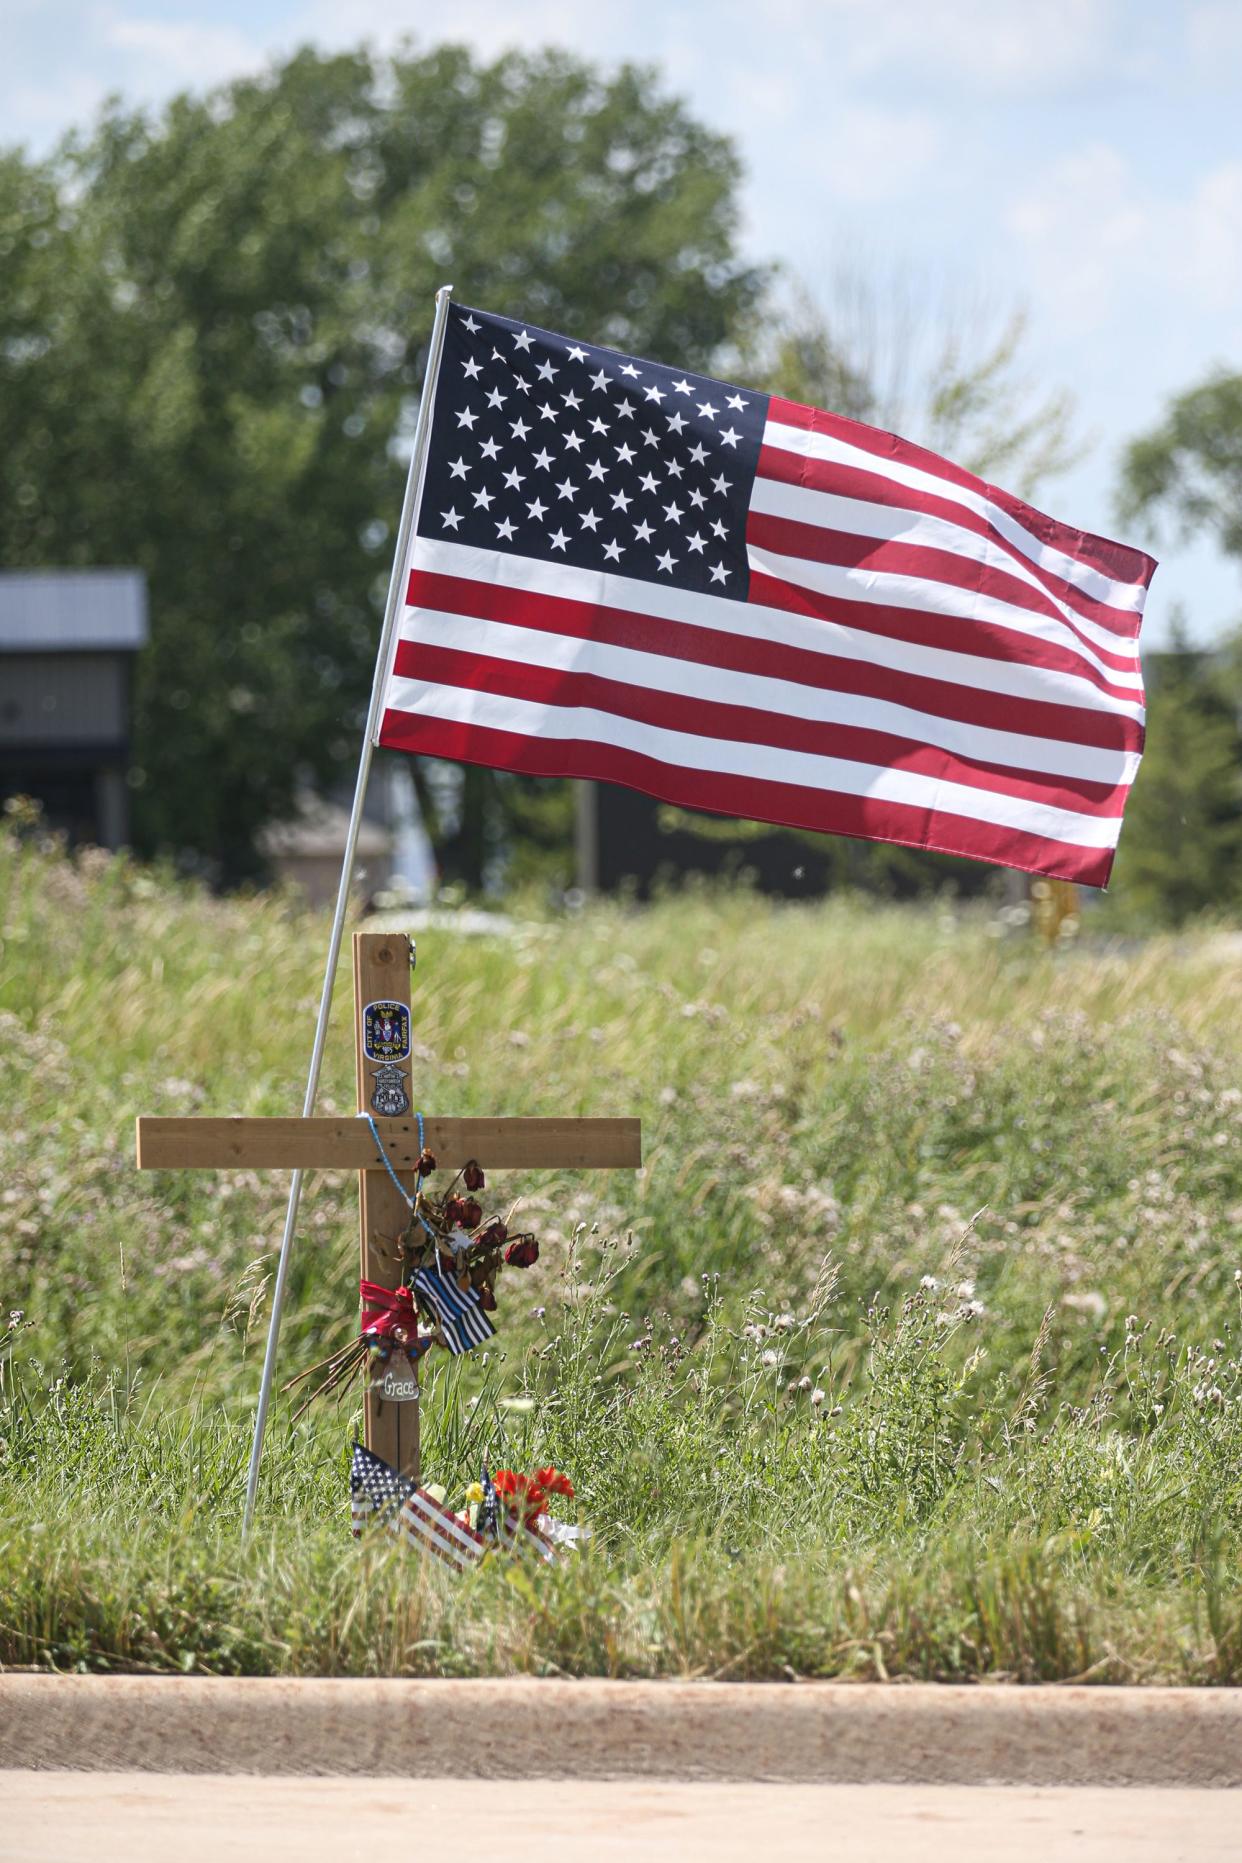 A memorial sits at the scene of a fatal crash on Winnebago Drive, just west of U.S. 151 near Fond du Lac, where Phillip Thiessen, 55, of Fond du Lac was killed June 3, 2020. Daniel Navarro of Fond du Lac is charged with using his vehicle to intentionally hit Thiessen, who was on a motorcycle.